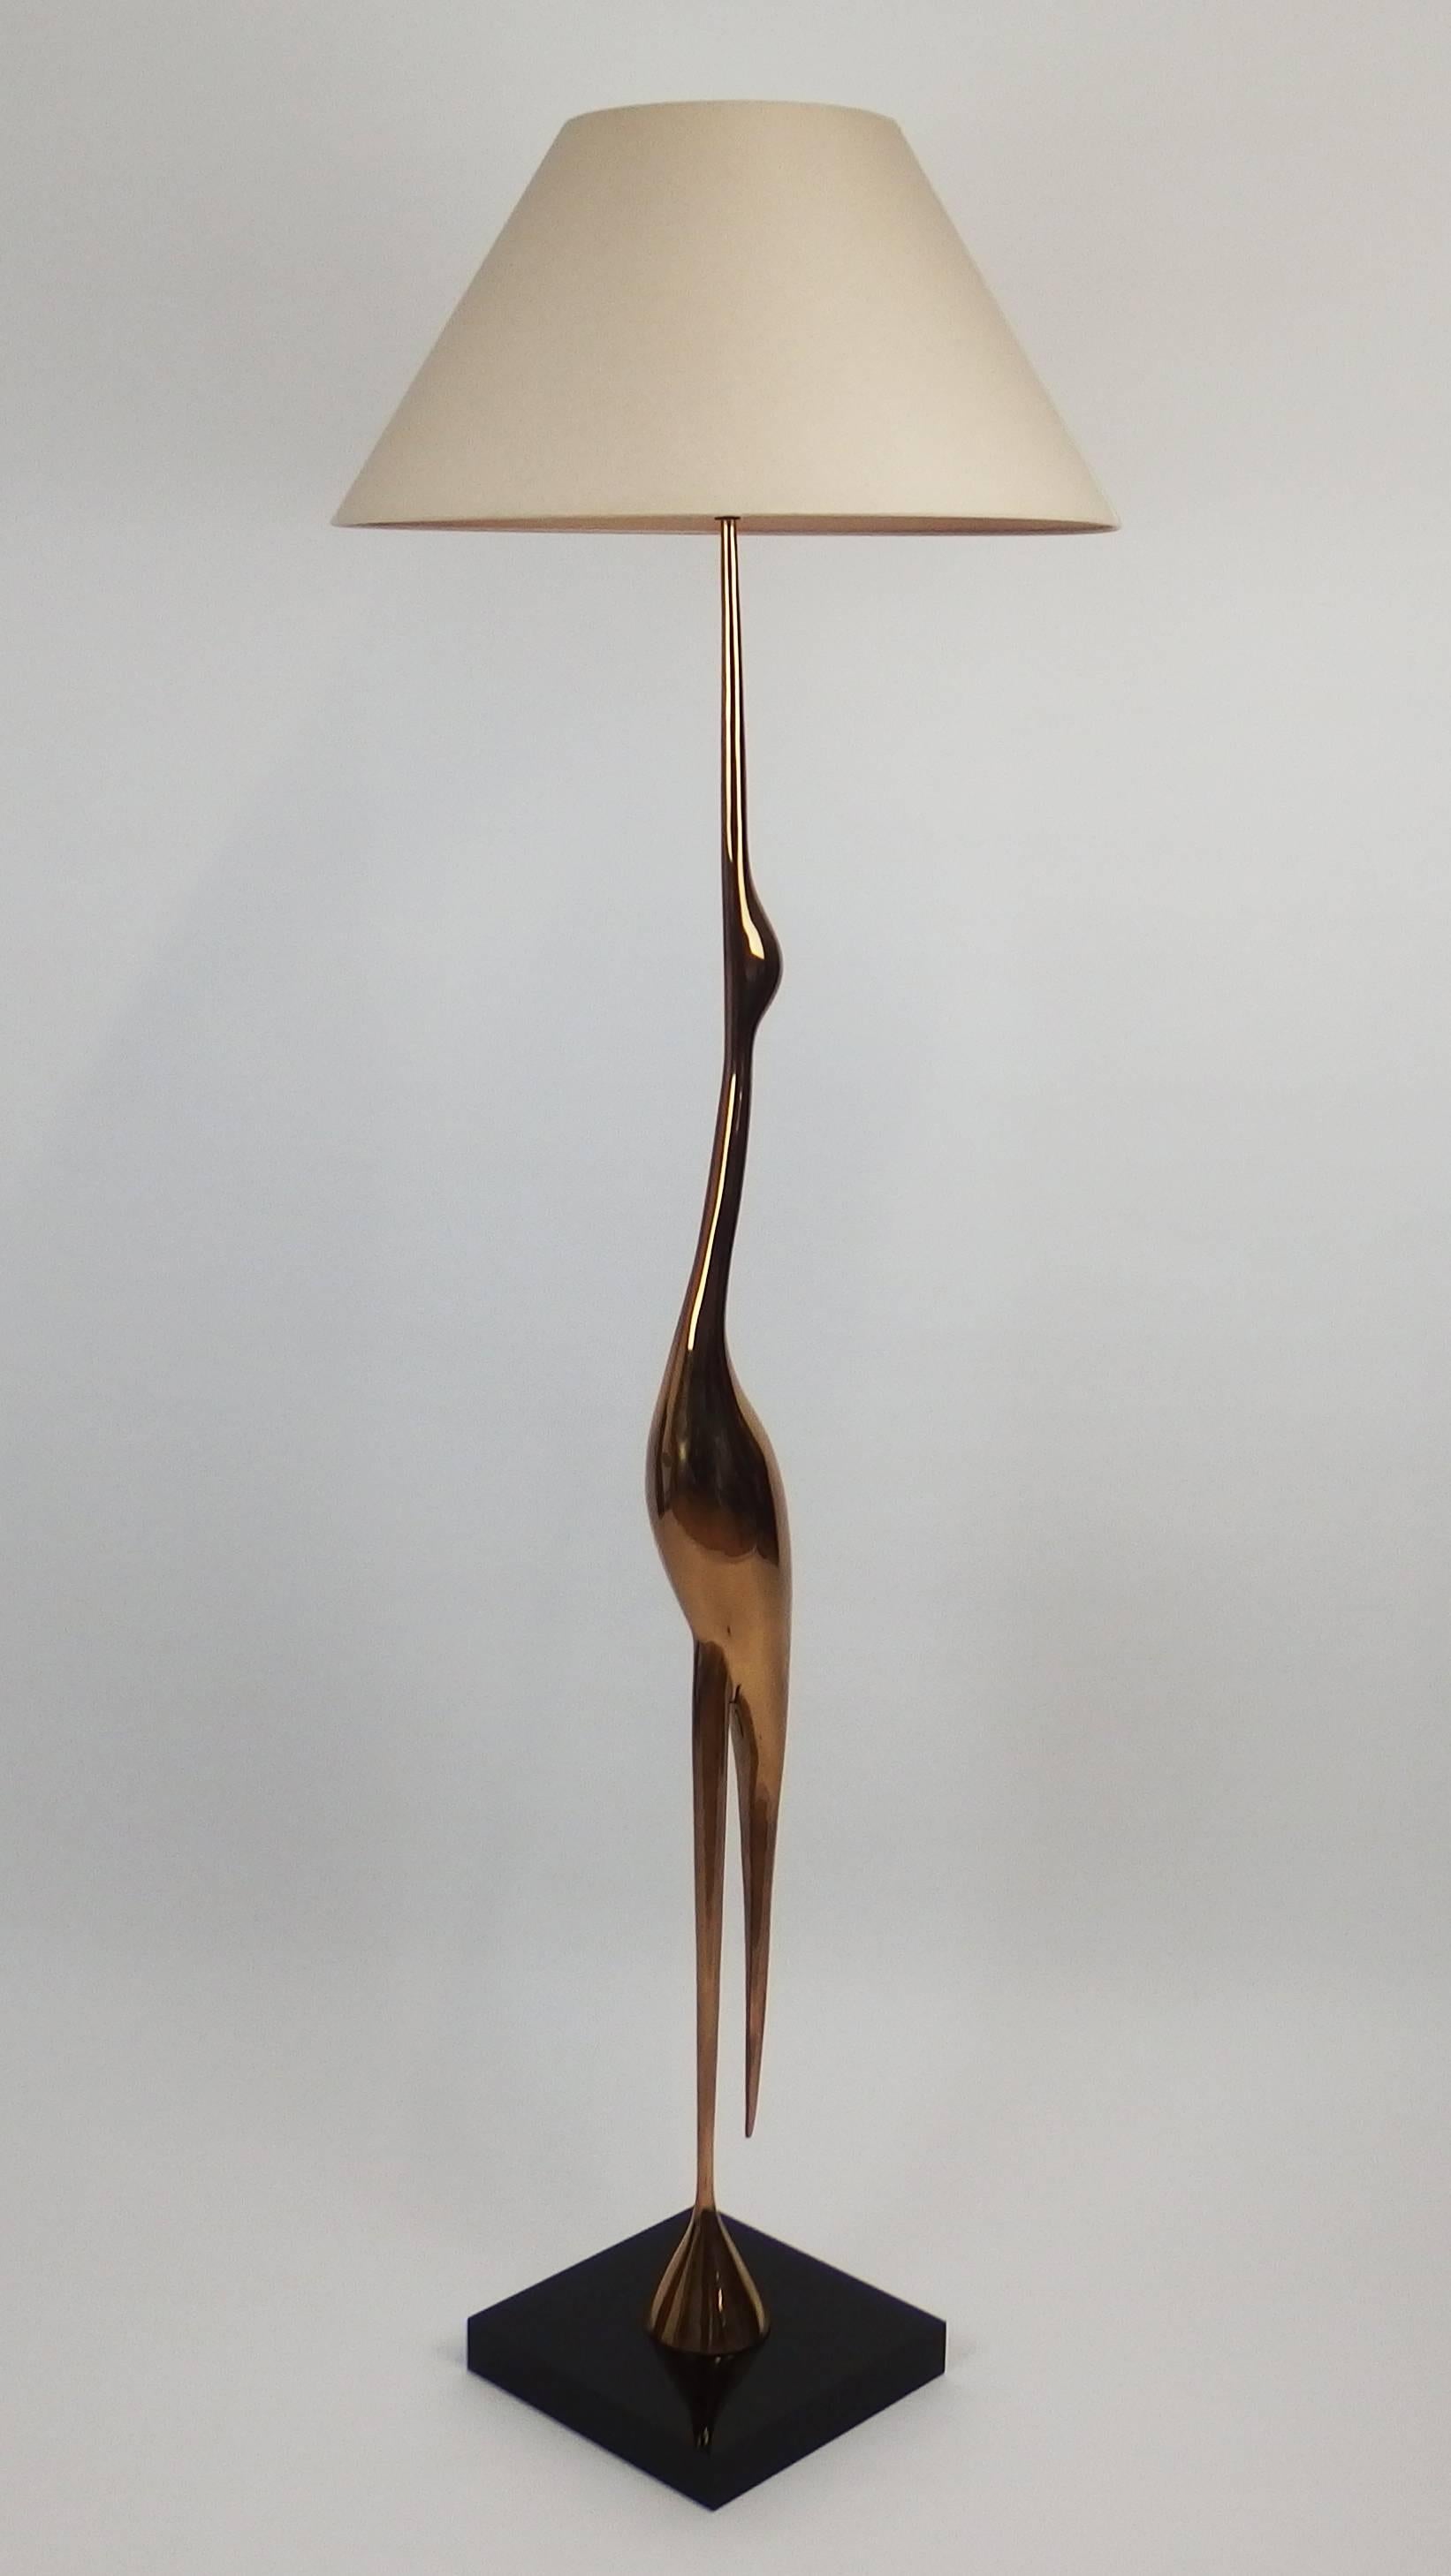 A gilt polished bronze floor lamp modelled as a stylized heron by René Broissand on a square plexiglass base.
Signed: R Broissand Santangelo
Height with the shade:73.75in.